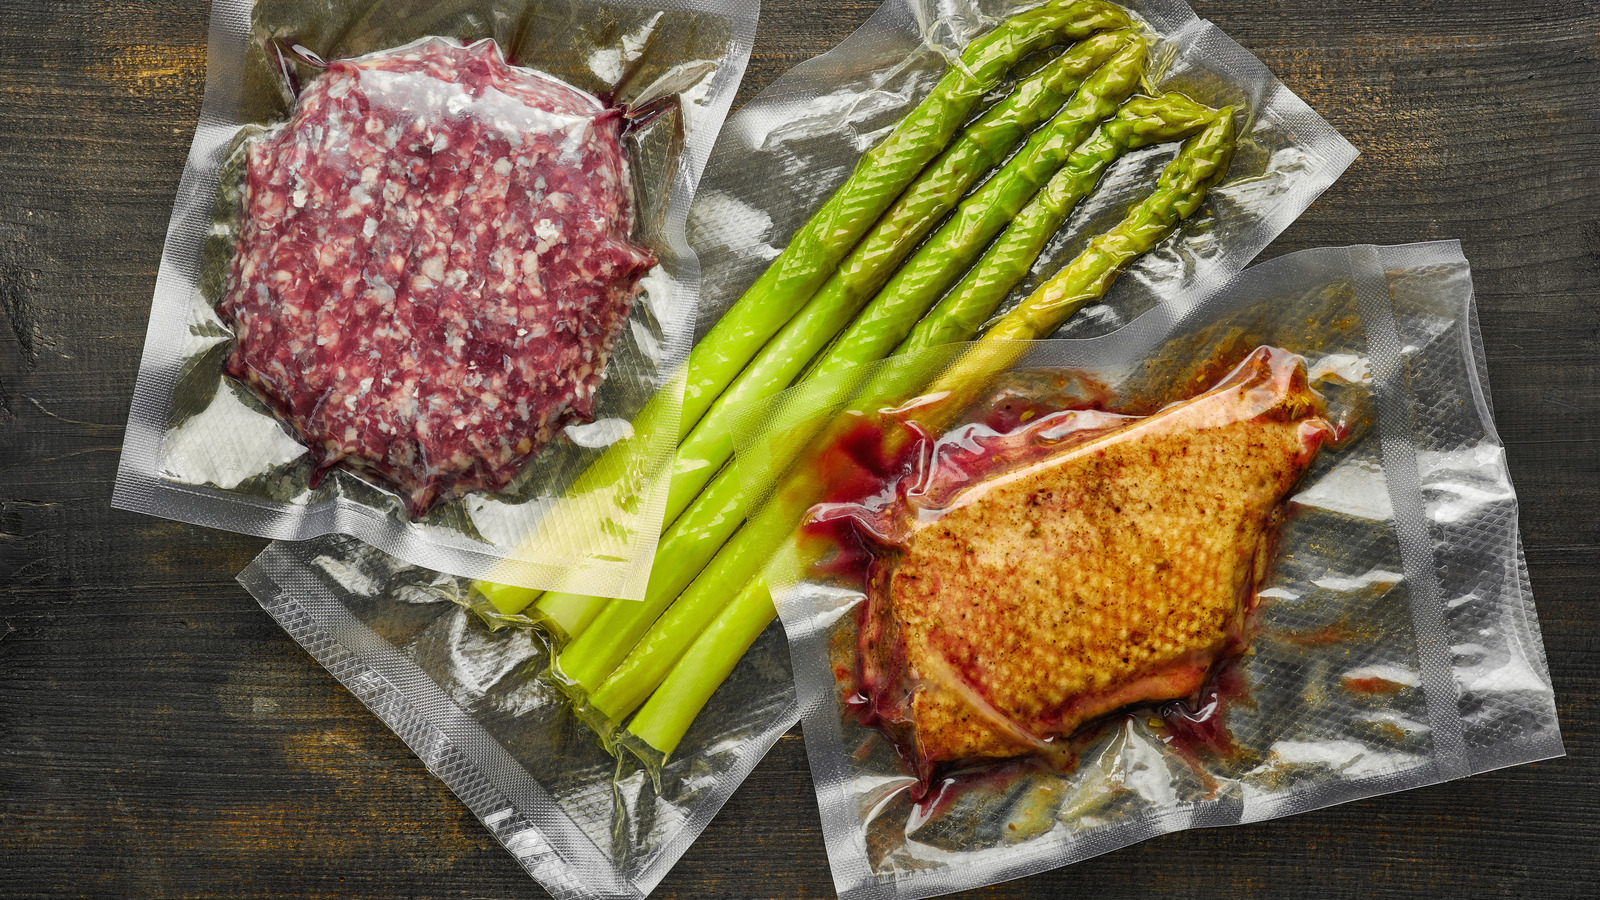 How Vacuum Sealer Bags Can Expertly Alter The Way You Cook